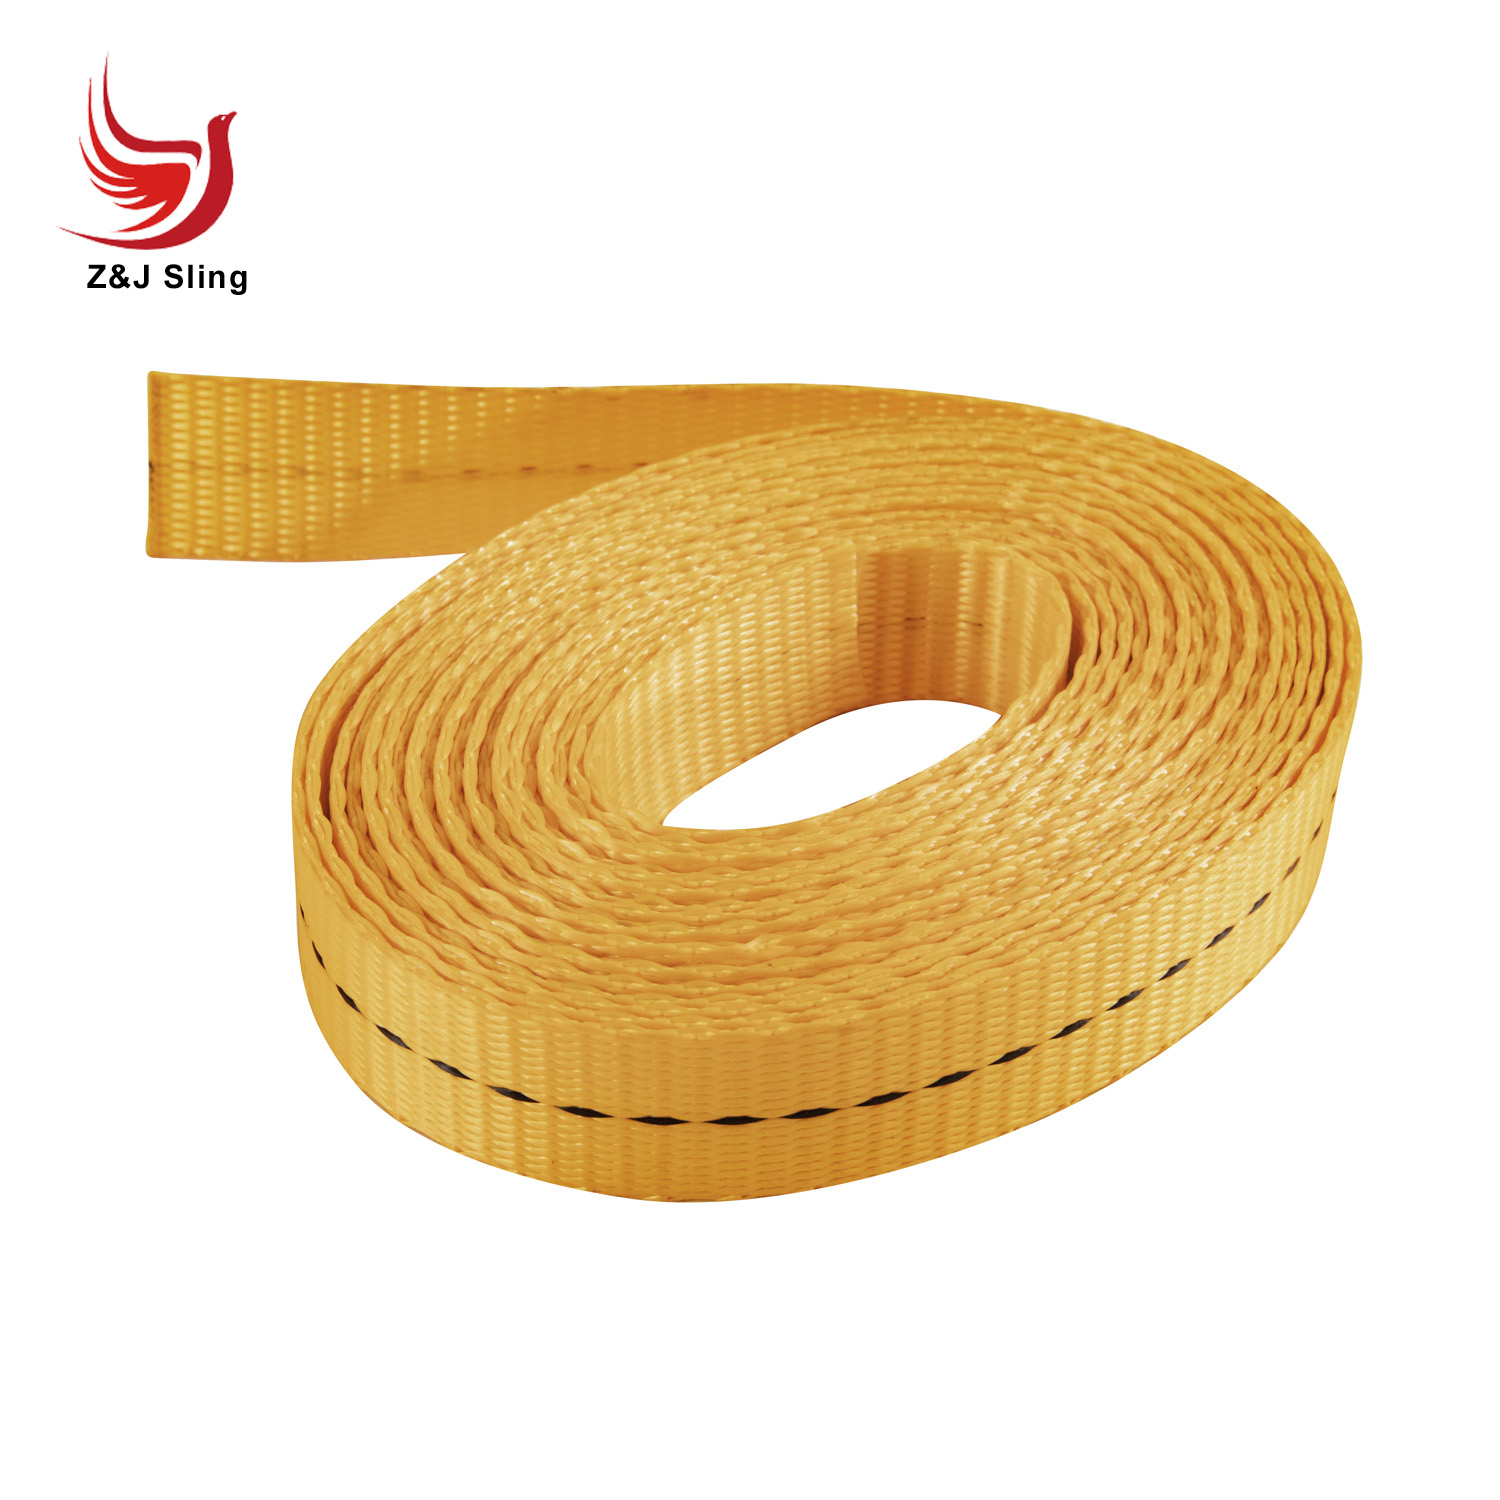 Lifting Sling Webbing Sling Easy to Operate Lifting equipment